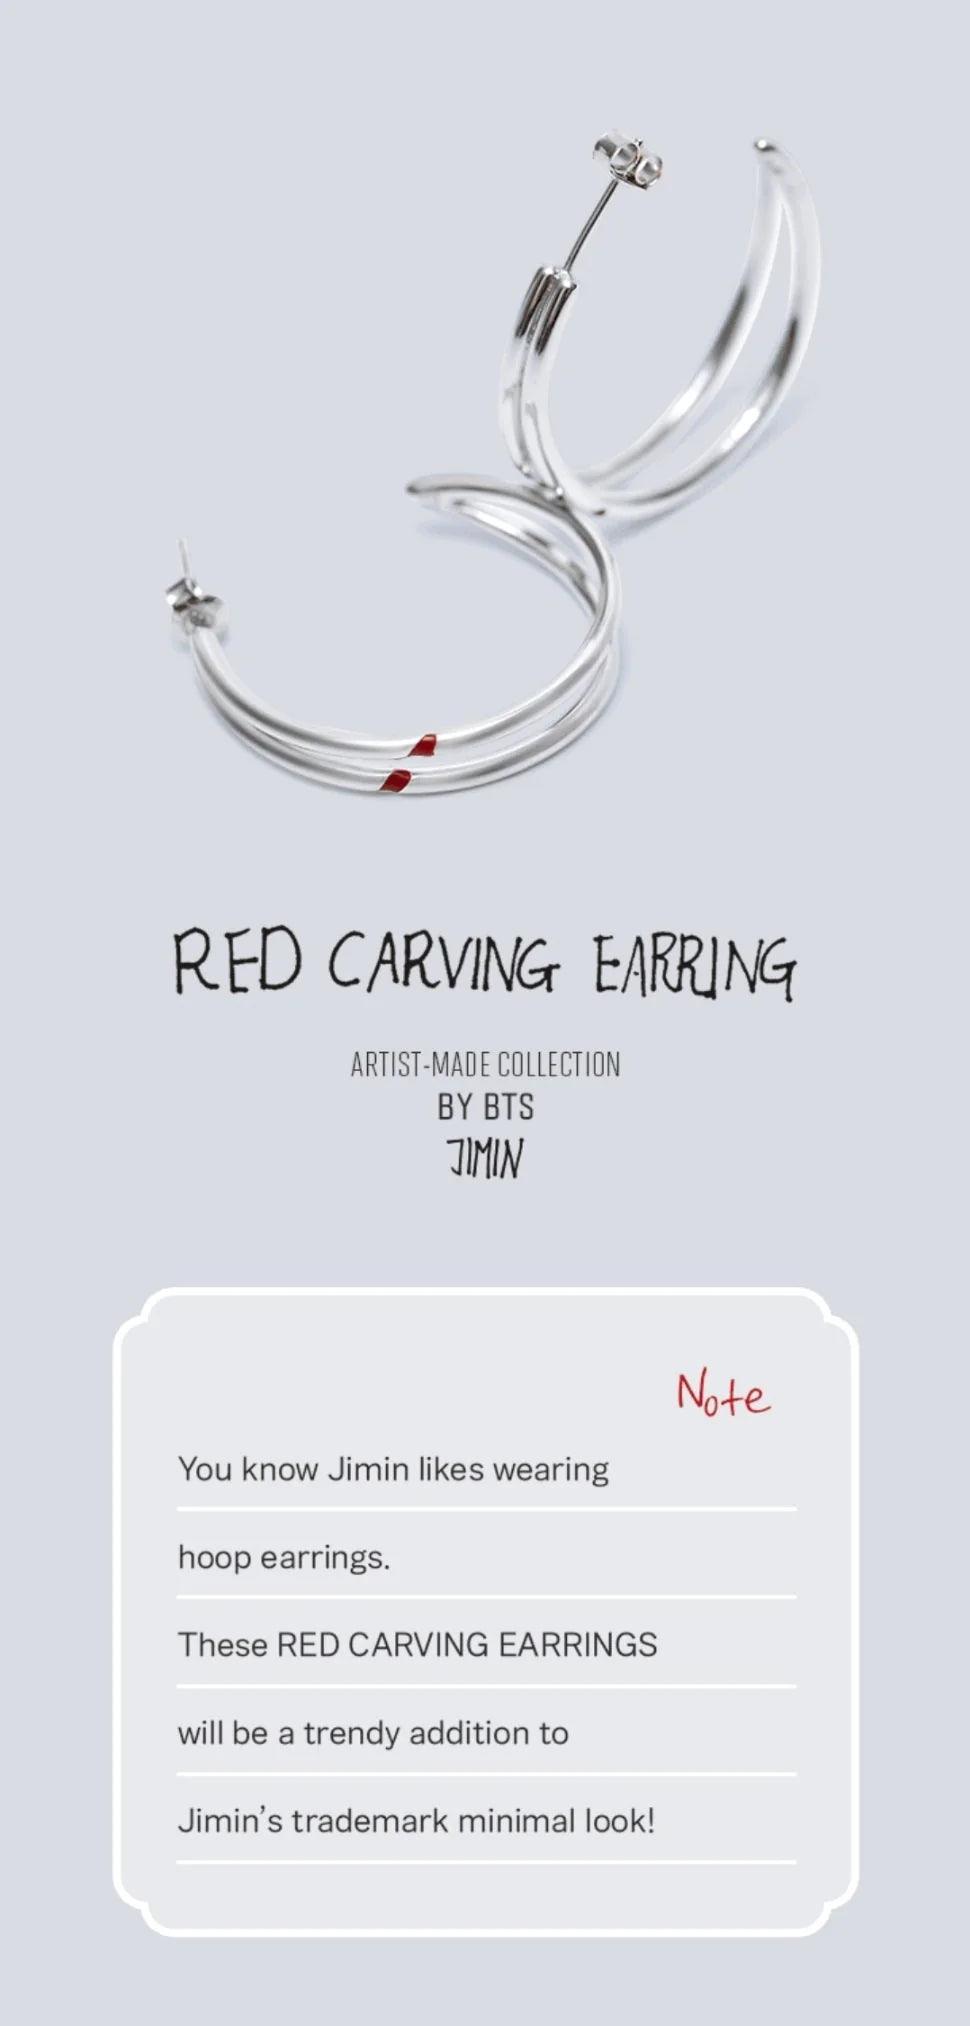 [2nd PRE ORDER] BTS - ARTIST-MADE COLLECTION by JIMIN - RED CARVING EARRING - KAEPJJANG SHOP (캡짱 숍)